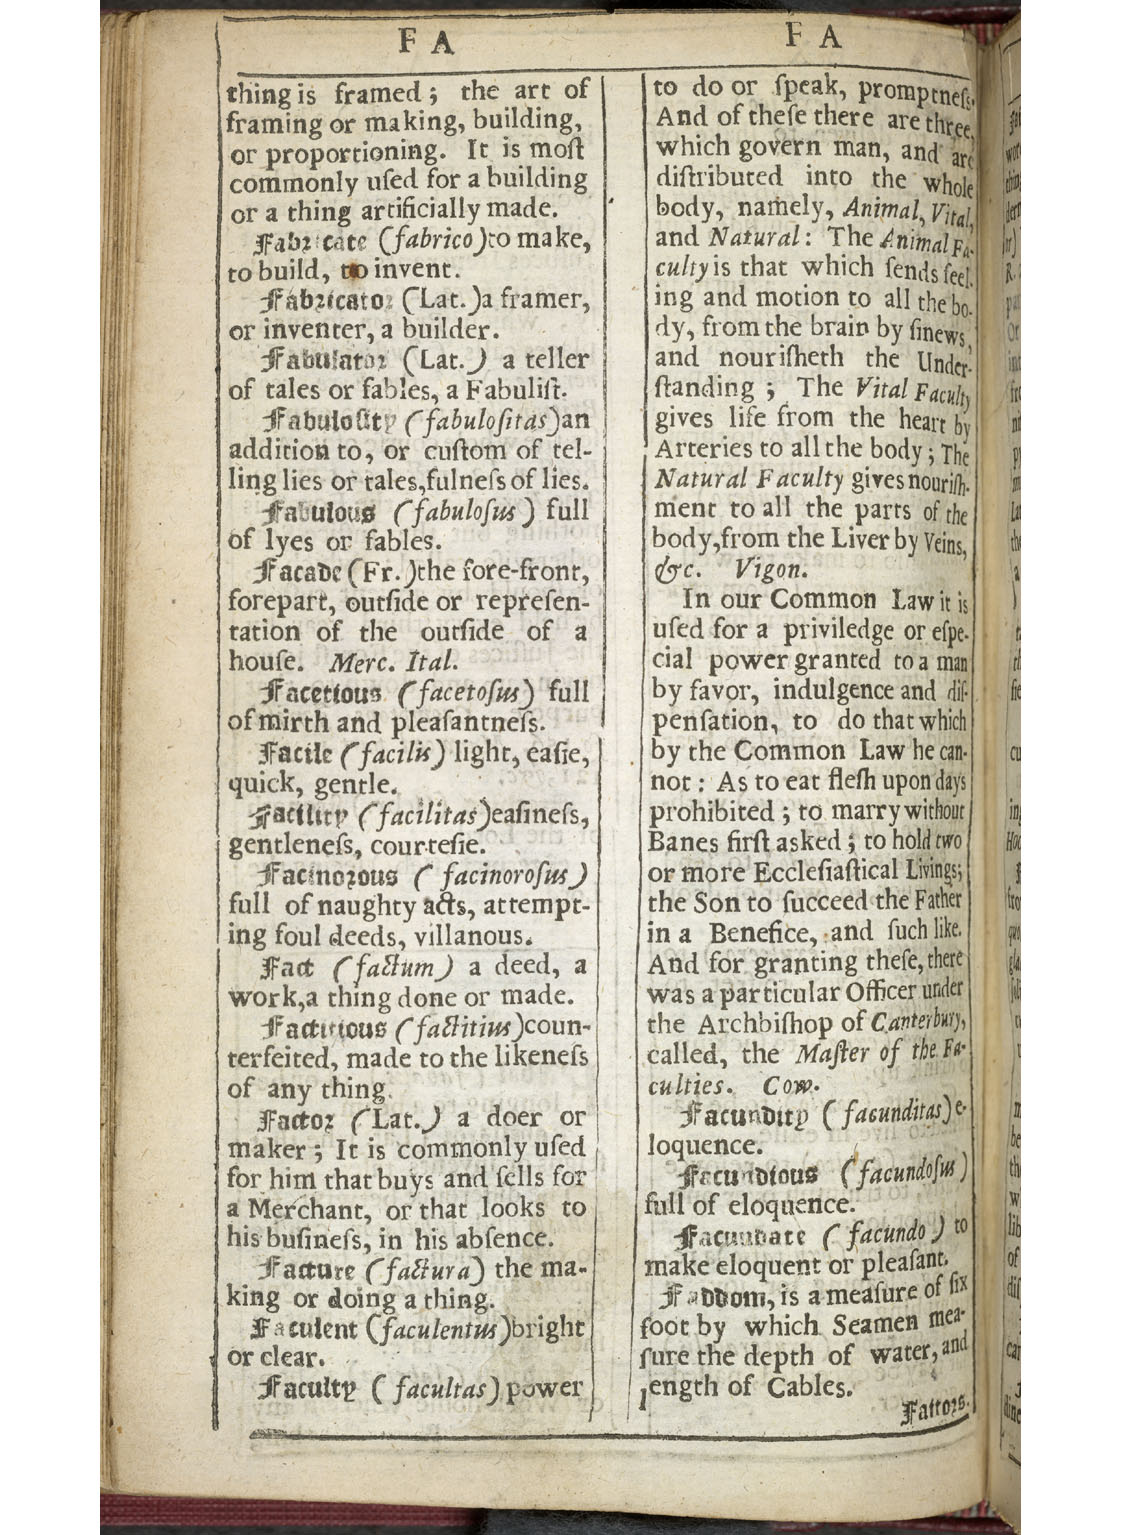 image of Blount dictionary